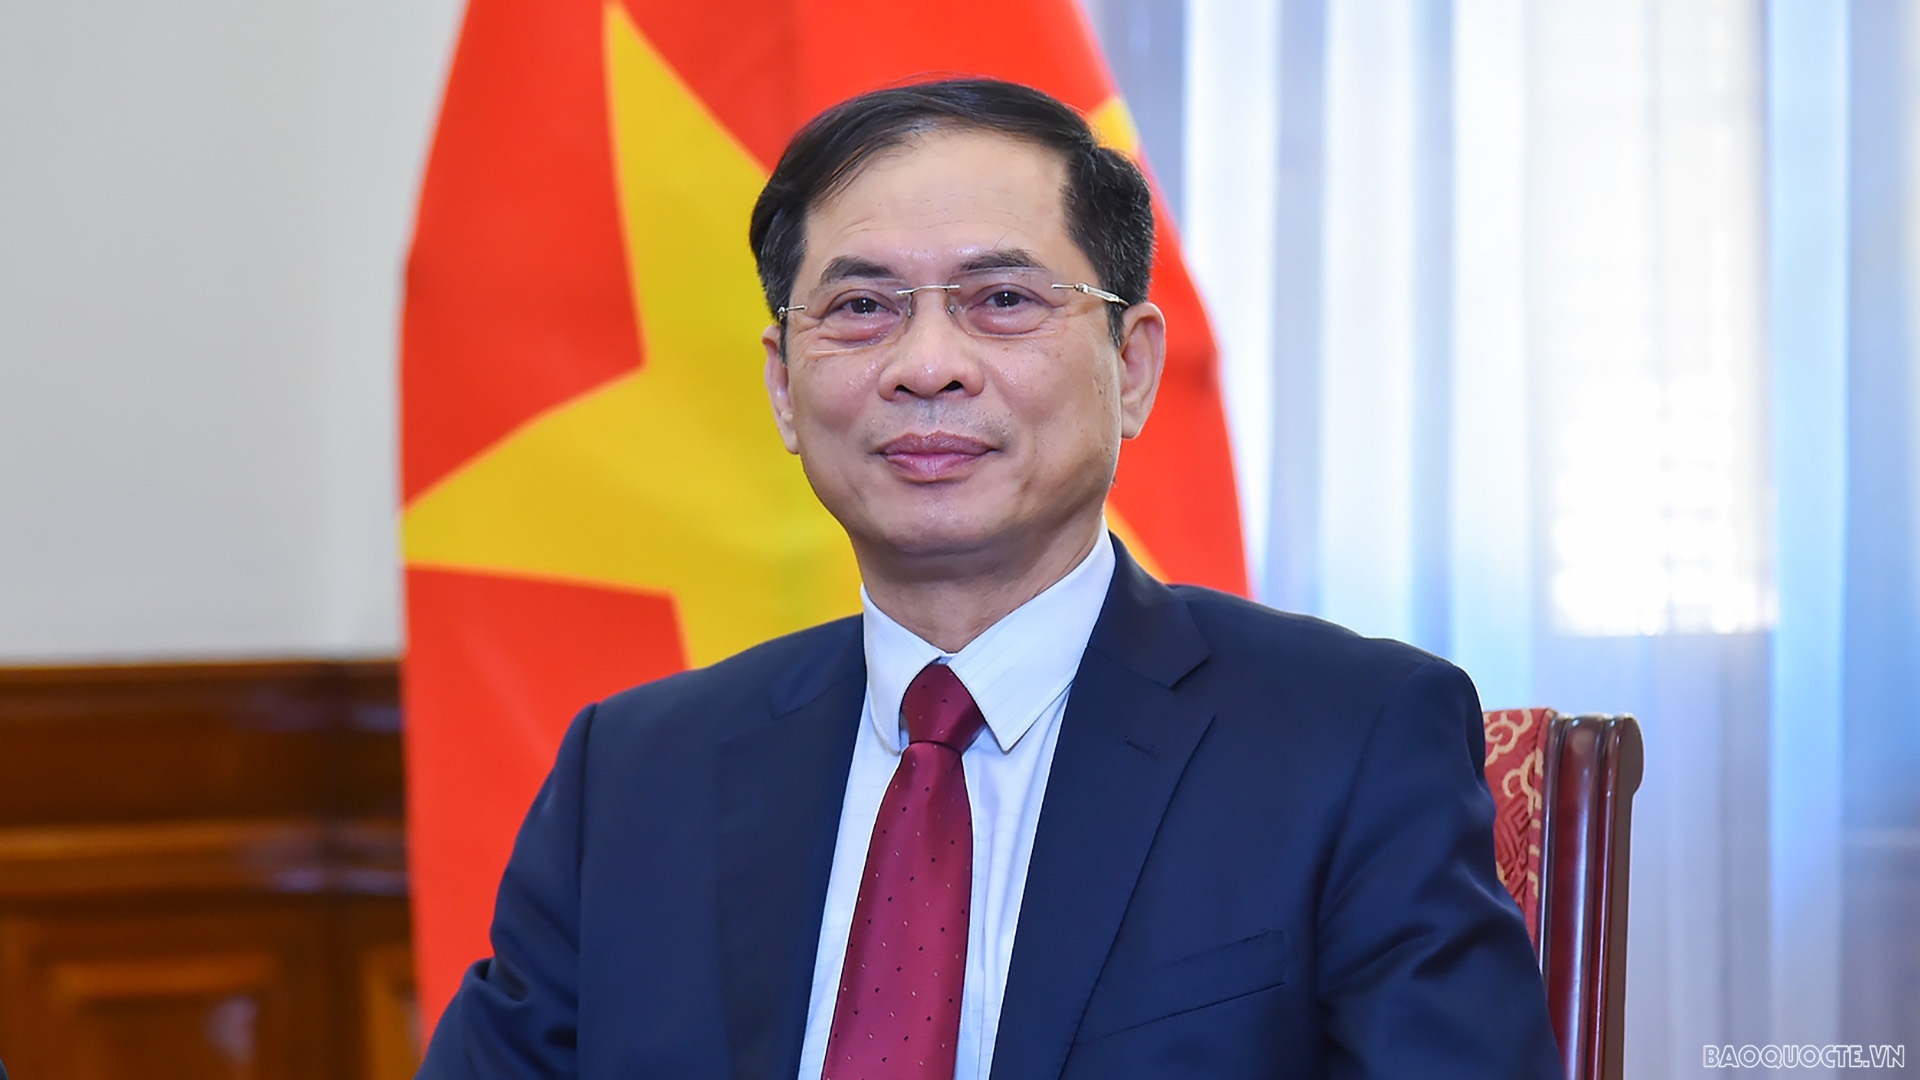 Diplomatic sector effectively serves national defence, development: Foreign Minister Bui Thanh Son